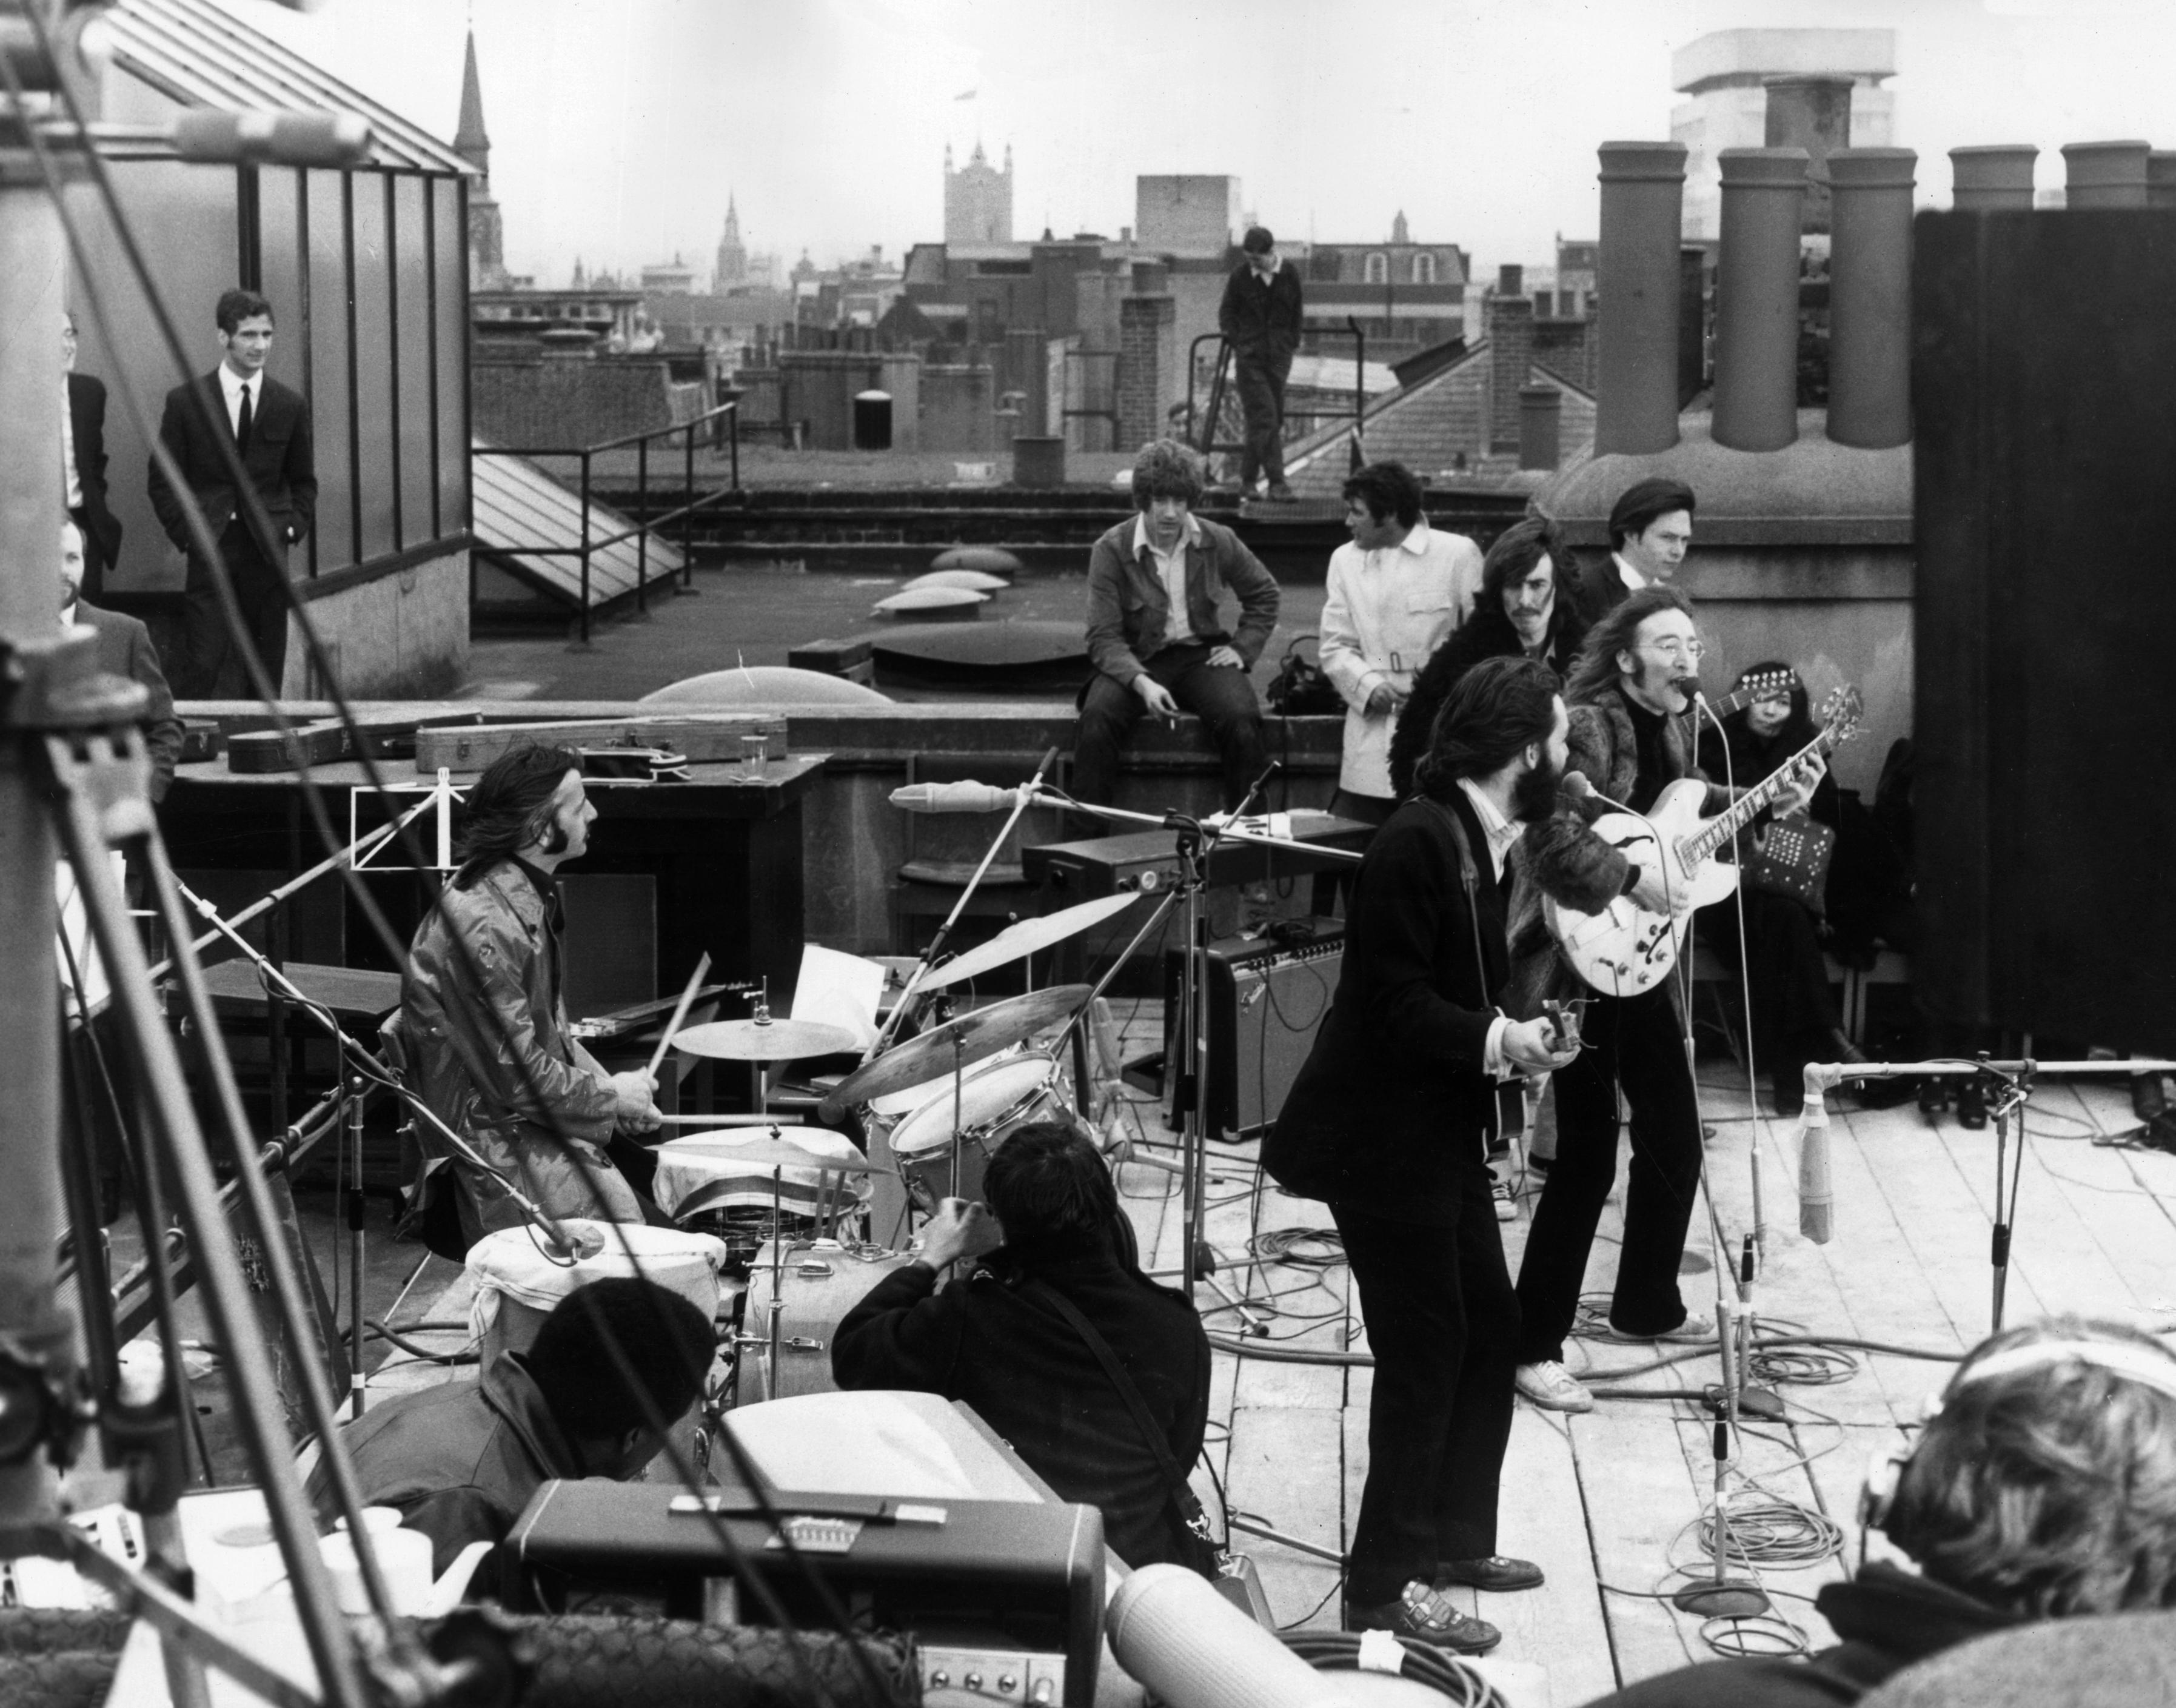  Ringo is seen during an iconic performance with his fellow Beatles on a London rooftop near the end of his career with the legendary band